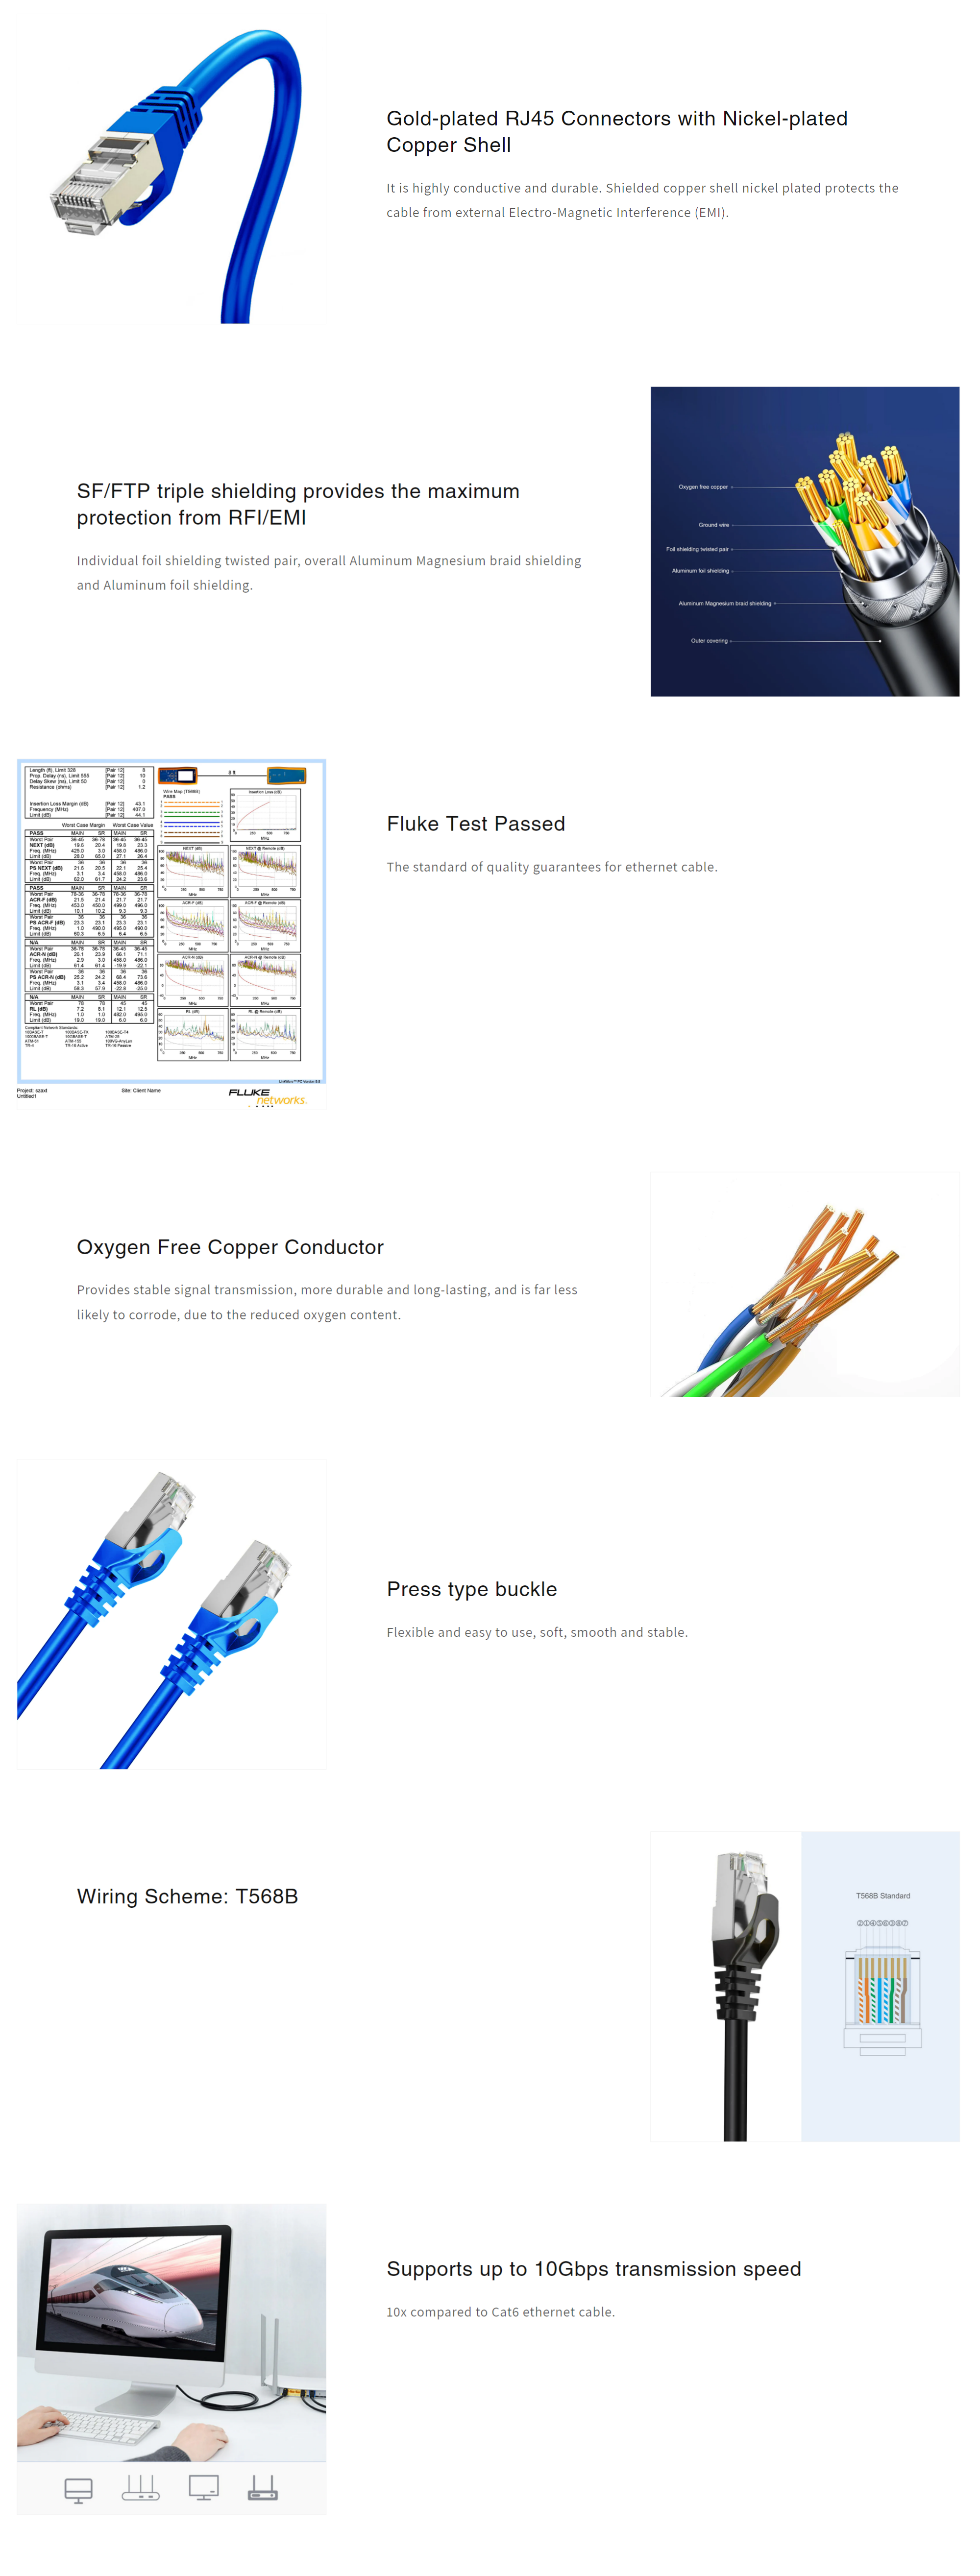 A large marketing image providing additional information about the product Cruxtec Cat7 10m 10GbE SF/FTP Triple Shielding Network Cable Blue - Additional alt info not provided